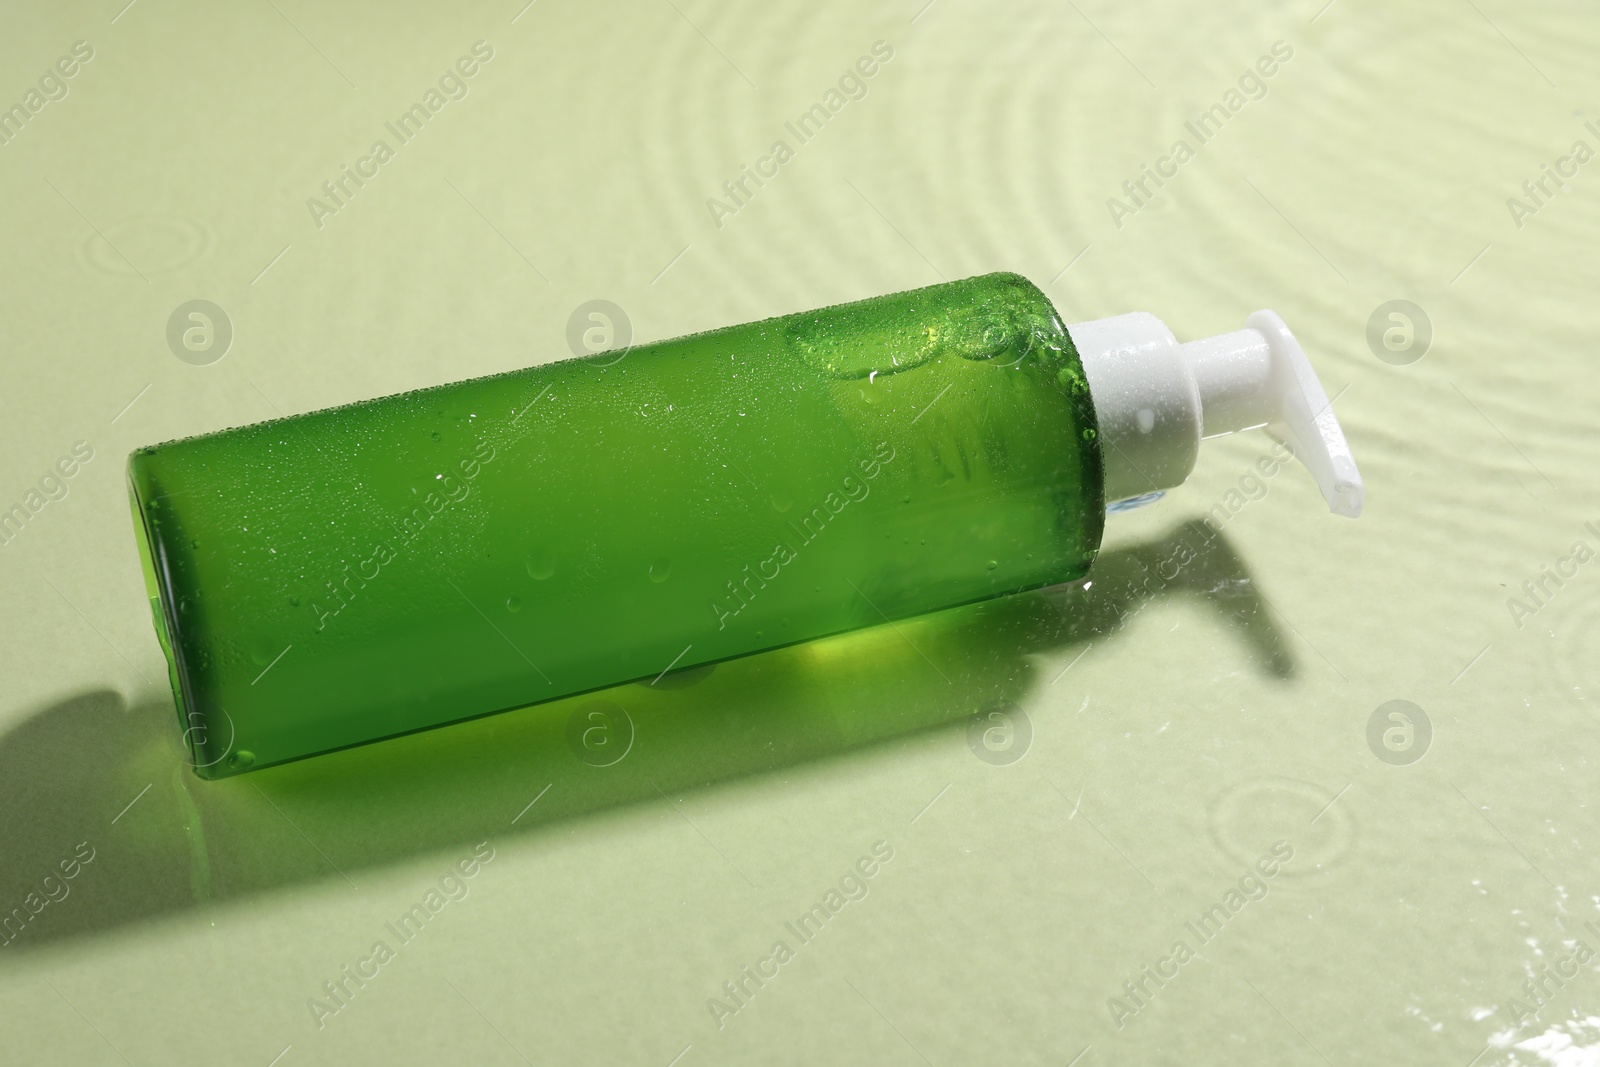 Photo of Bottle of facial cleanser in water against olive background